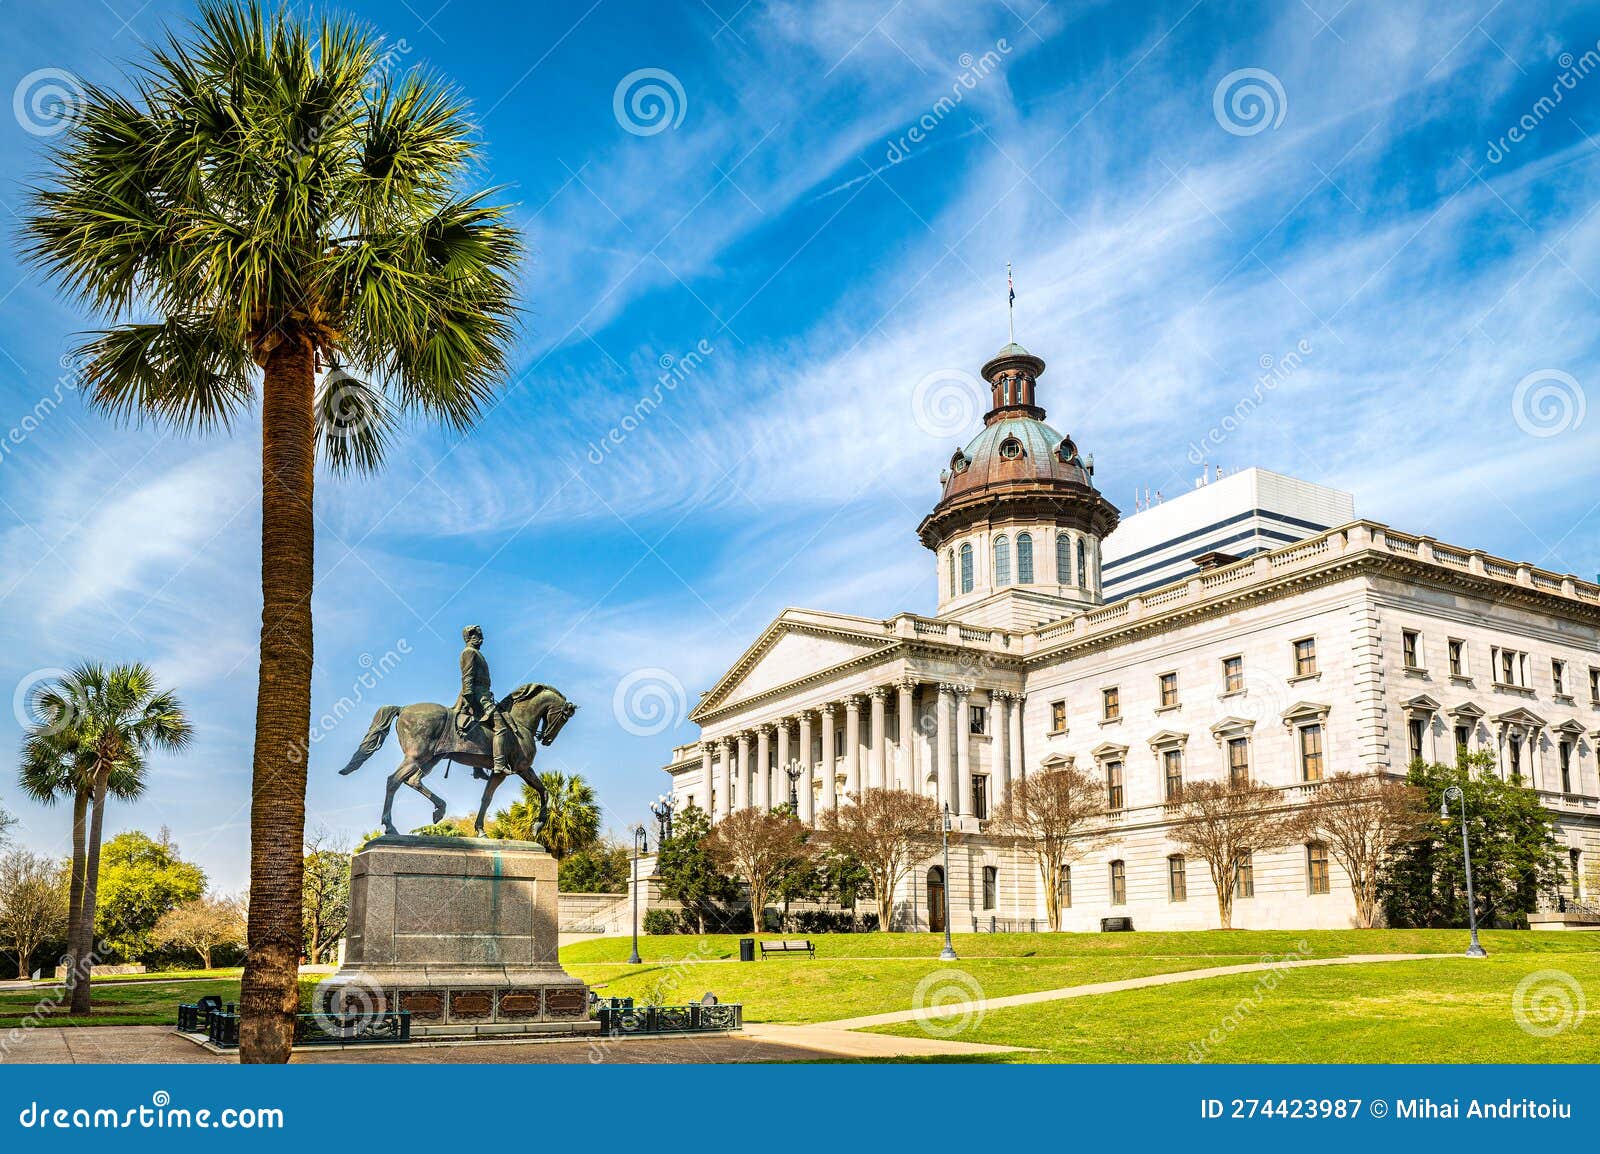 south carolina state house, in columbia, sc